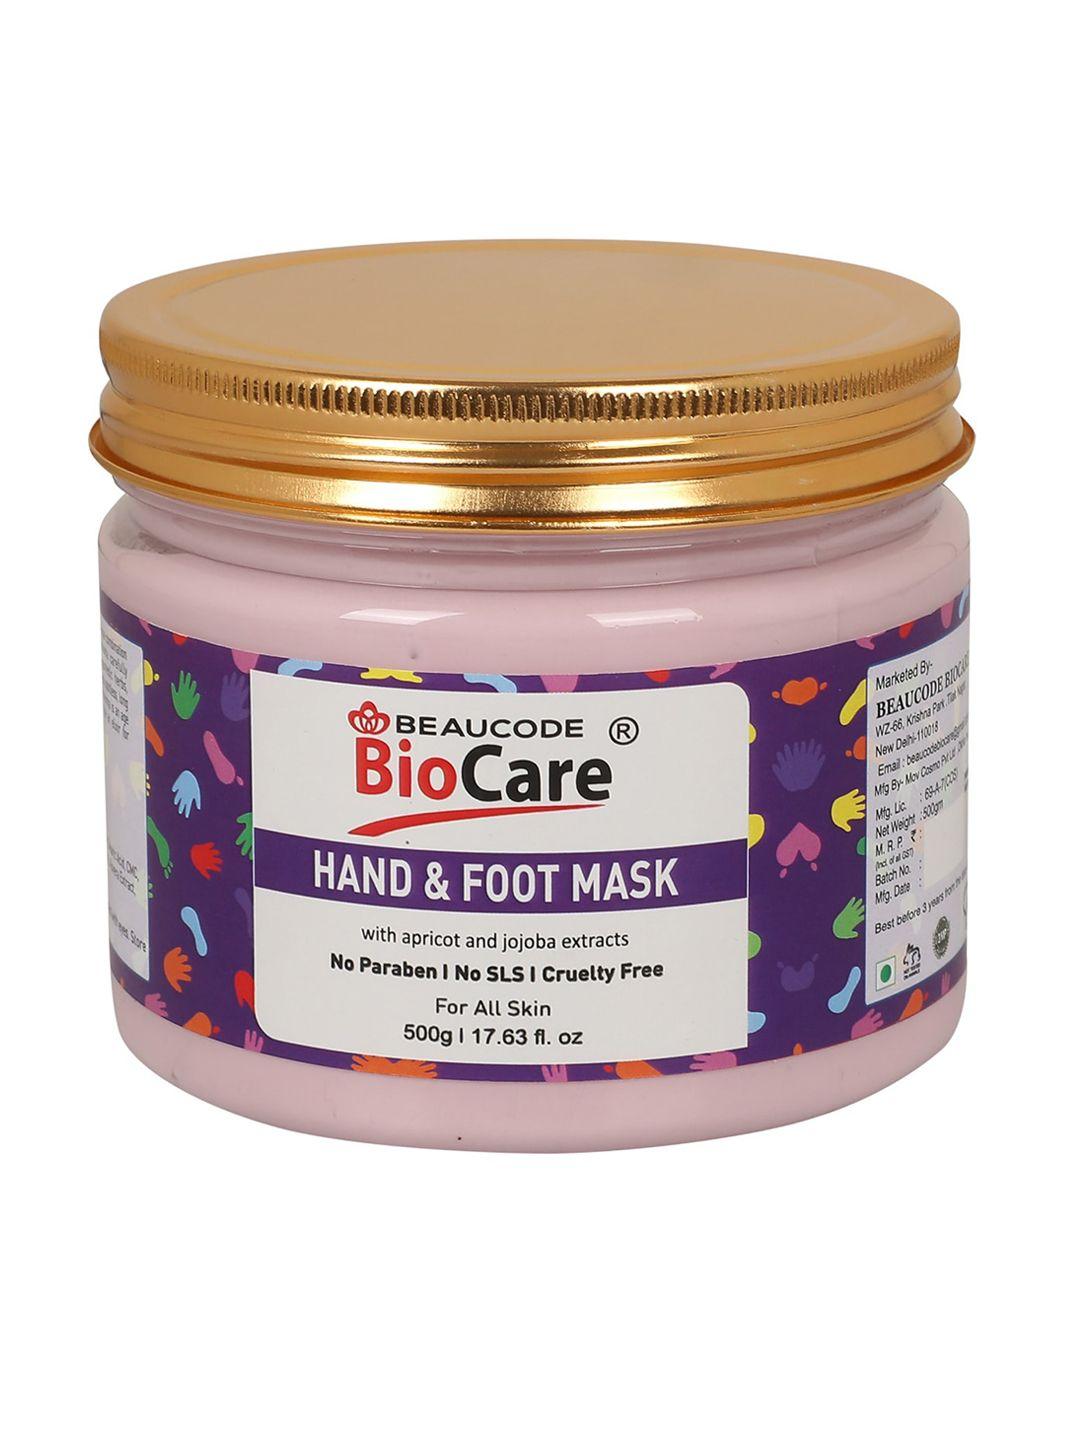 beaucode biocare hand & foot mask with apricot & jojoba extracts - 500 g